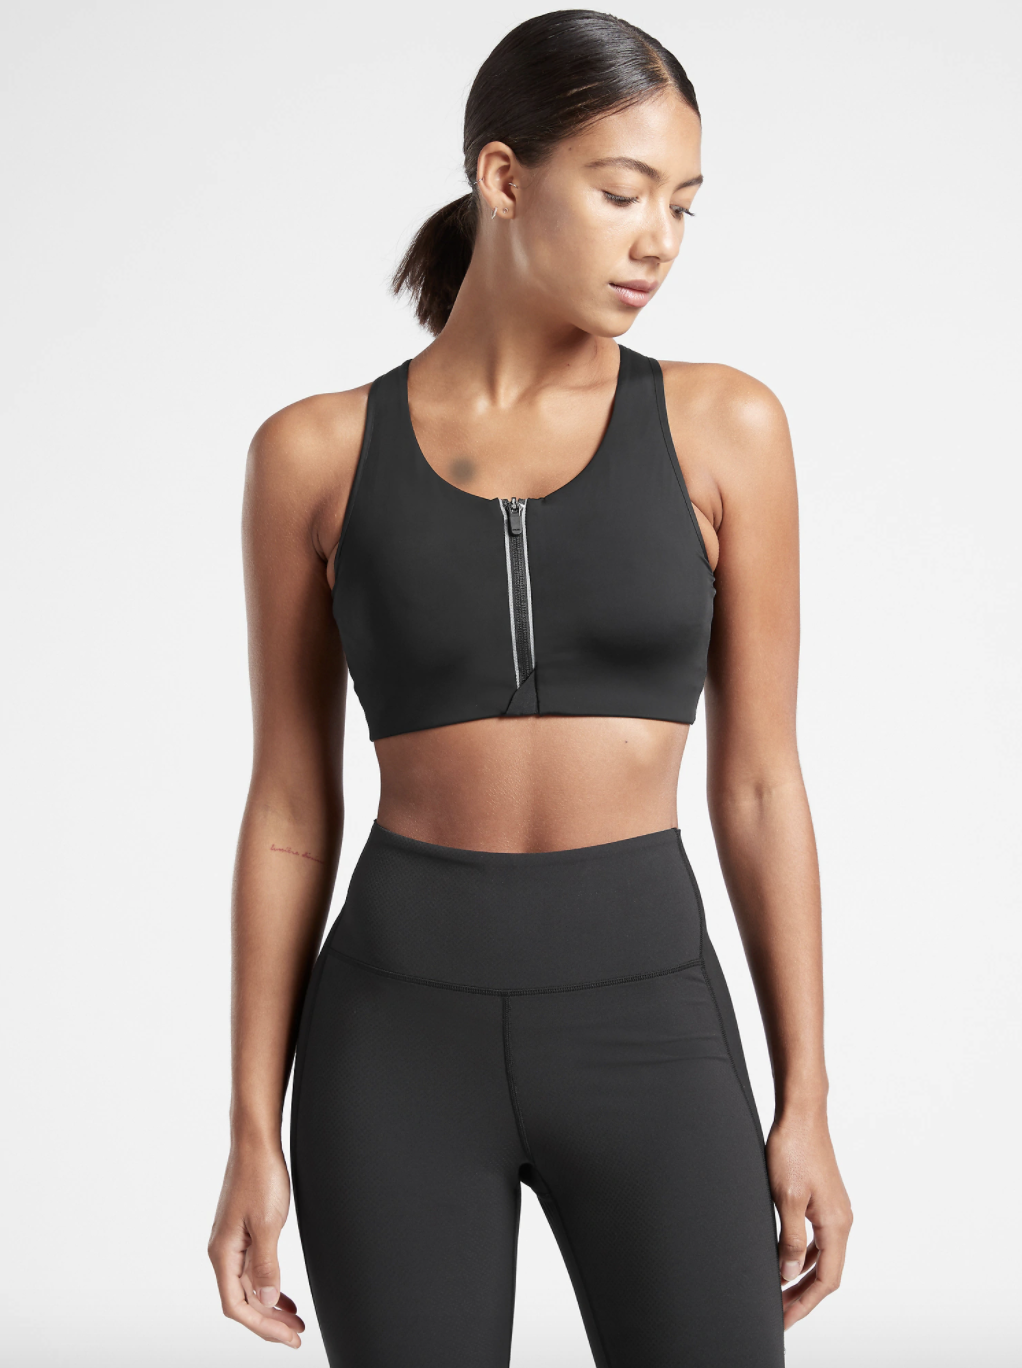 A model wearing the u-neck sports bra, which has a zippered front